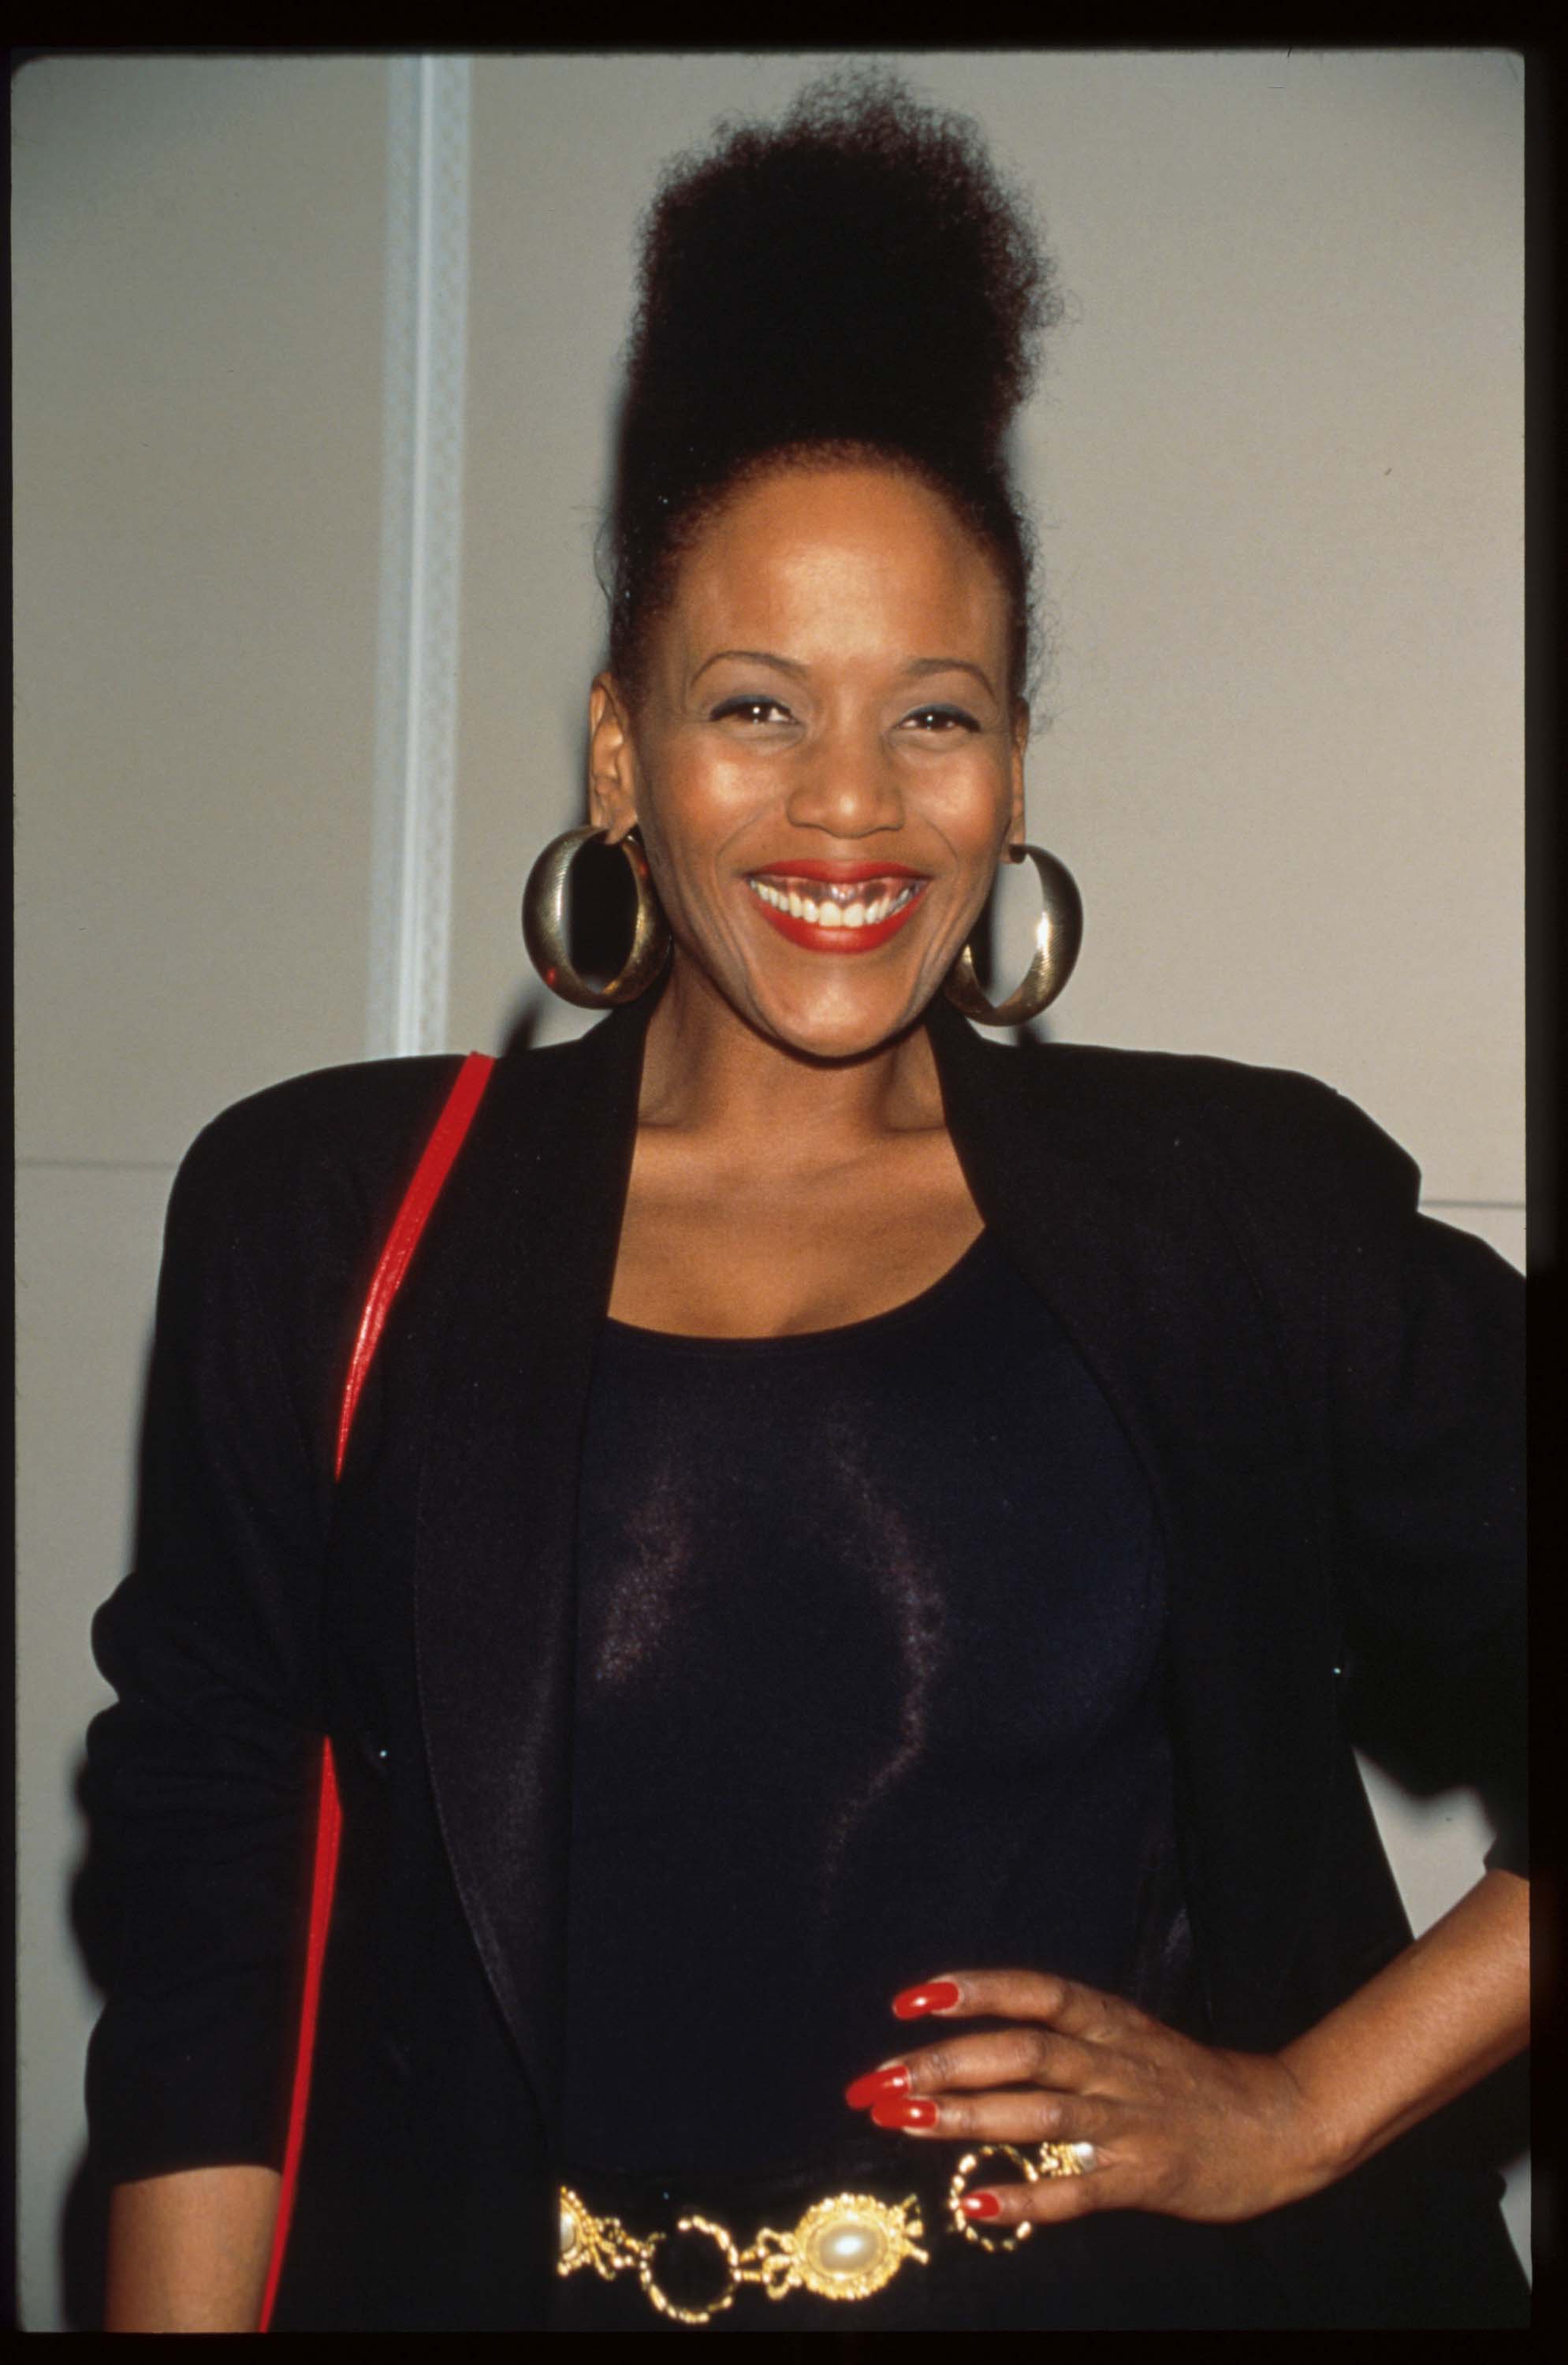 Toukie Smith attends the Sports Ball benefit dinner April 18, 1996 in New York City. | Photo: Getty Images